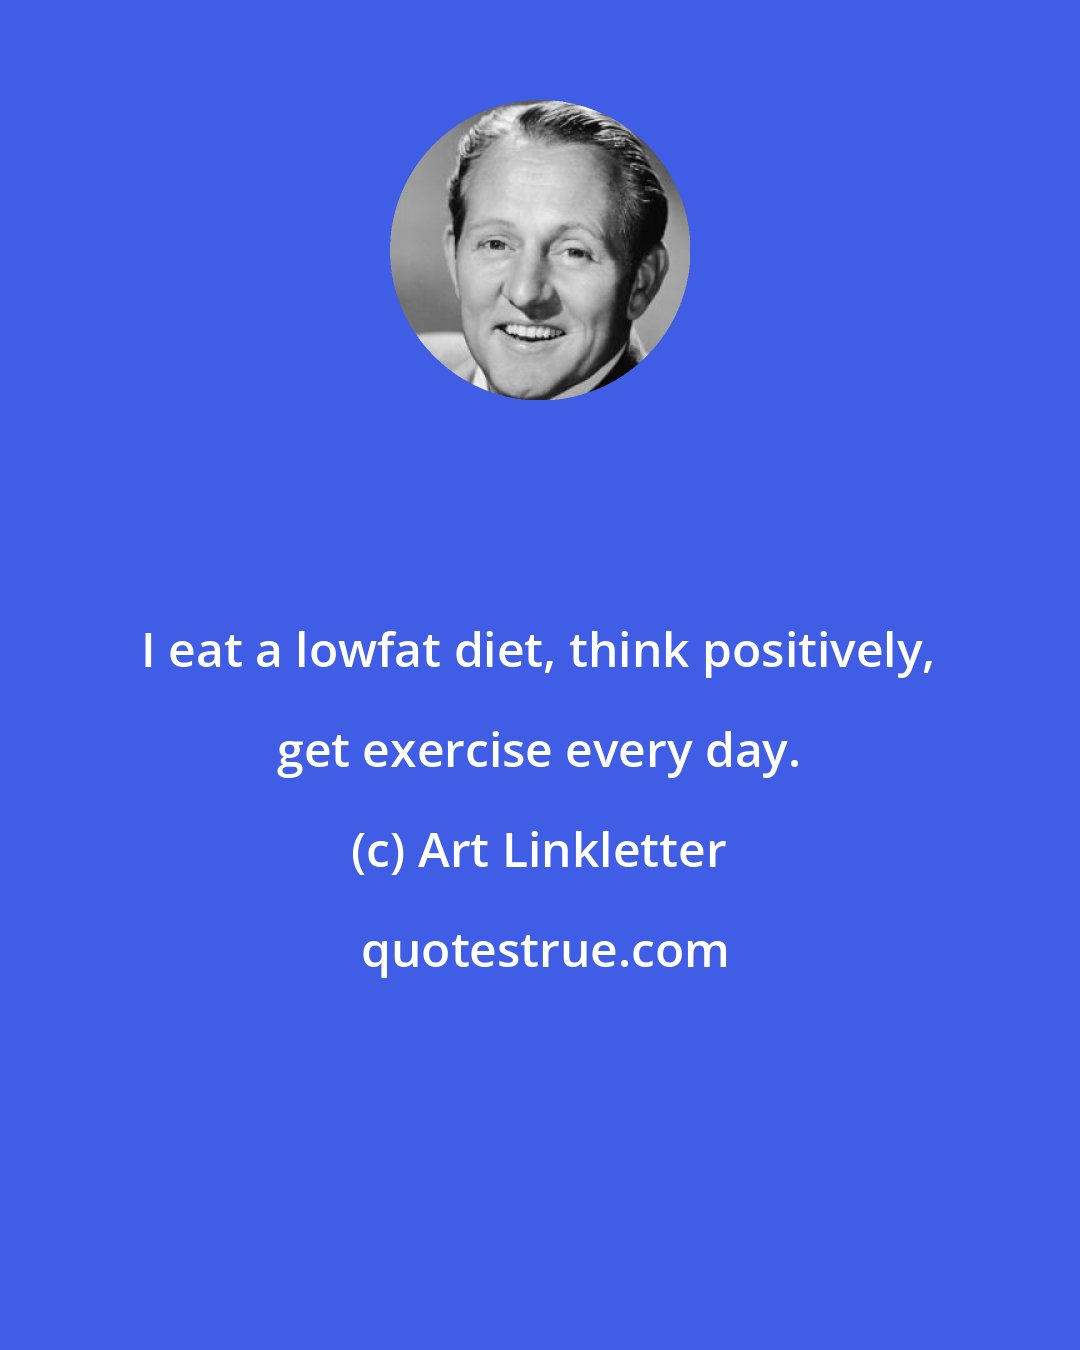 Art Linkletter: I eat a lowfat diet, think positively, get exercise every day.